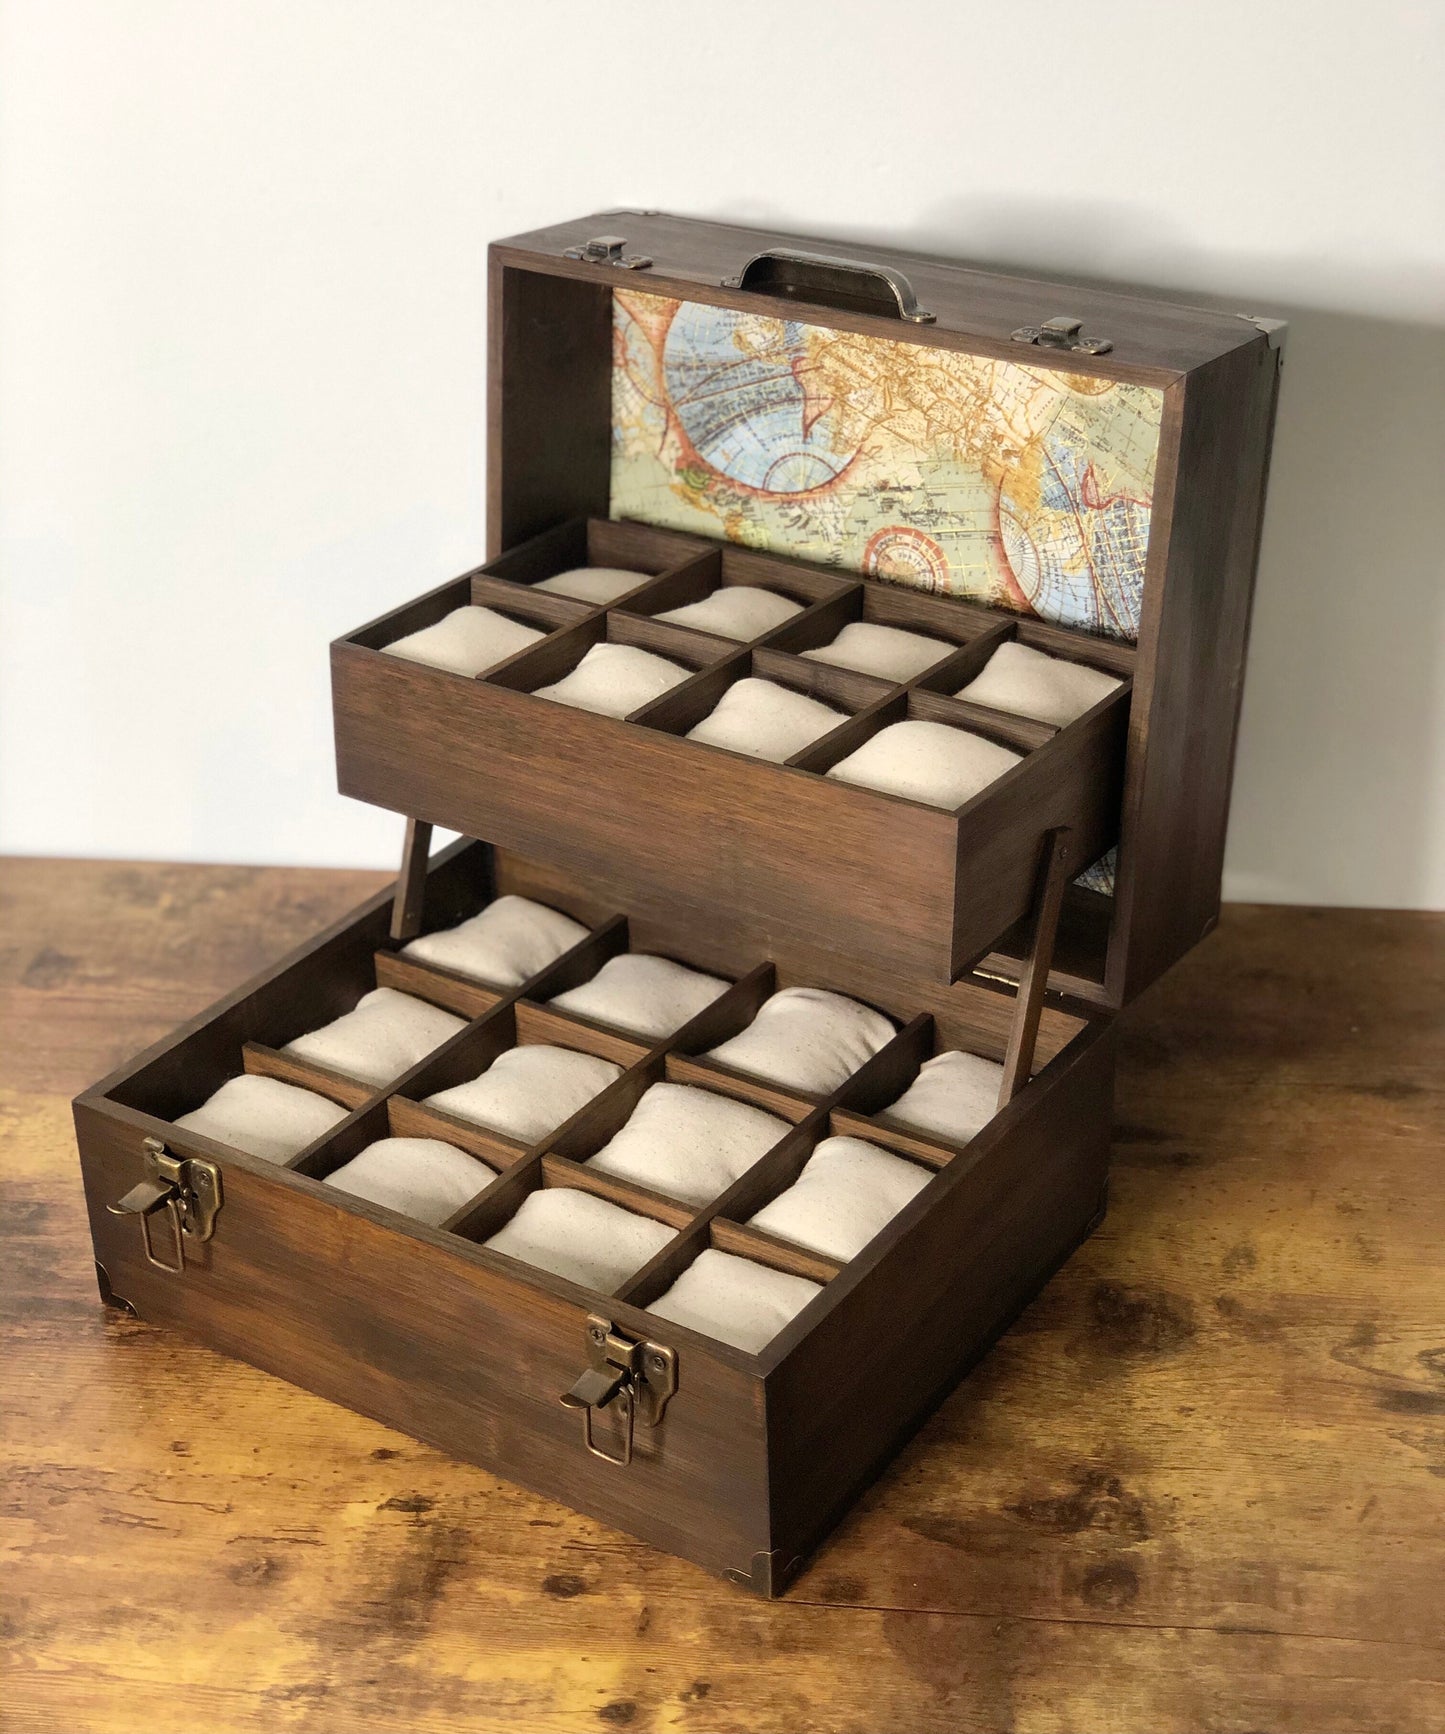 Chest Design Watch Box - Holds Up to 20 Watches